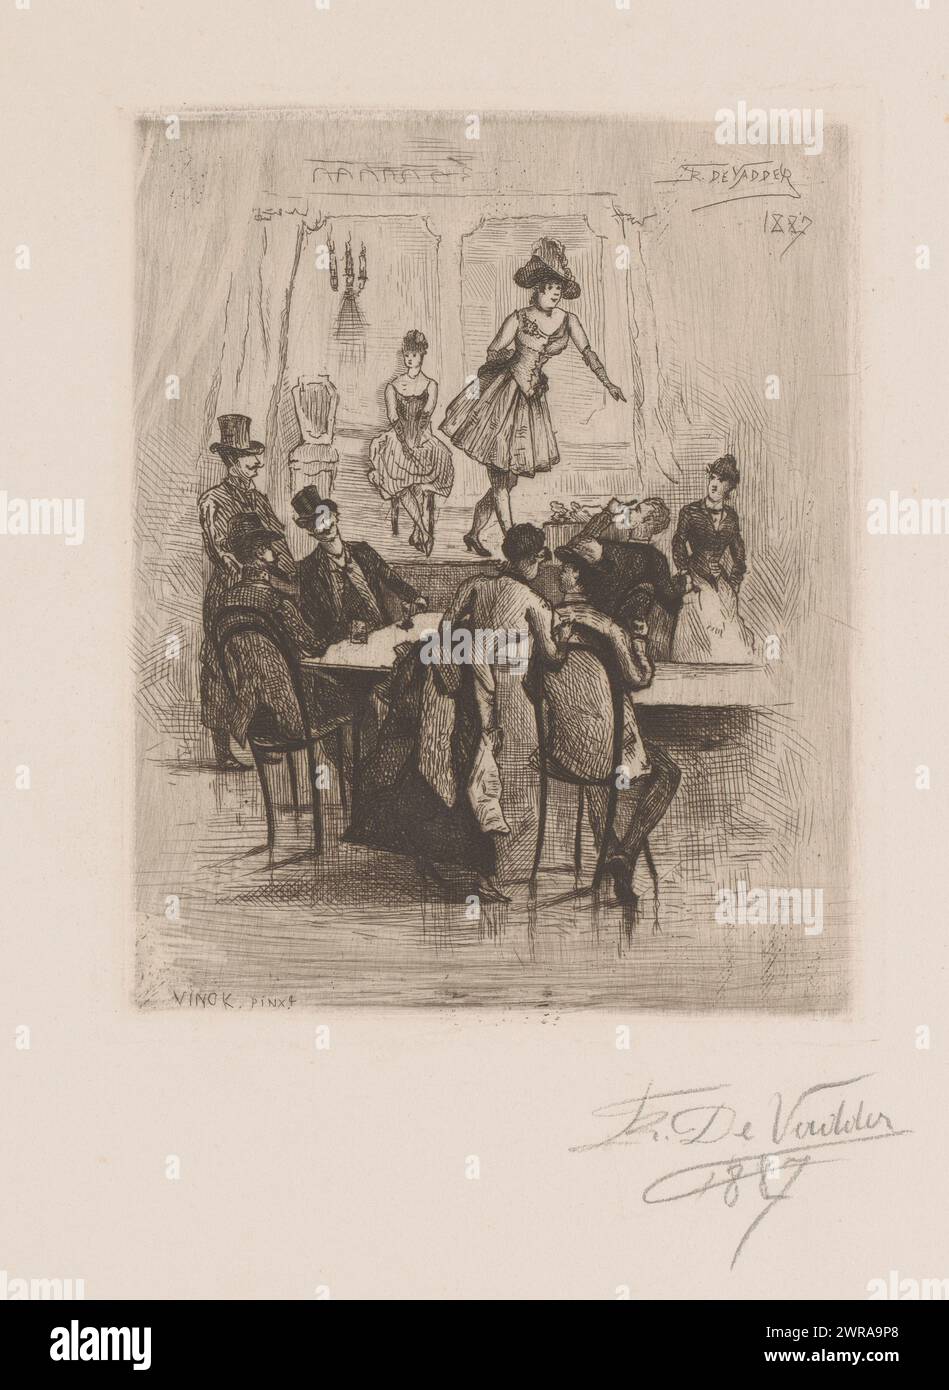 Café Chantant, print maker: Frans de Vadder, (signed by artist), after painting by: unknown, 1887, paper, etching, retroussage, height 200 mm × width 165 mm, print Stock Photo